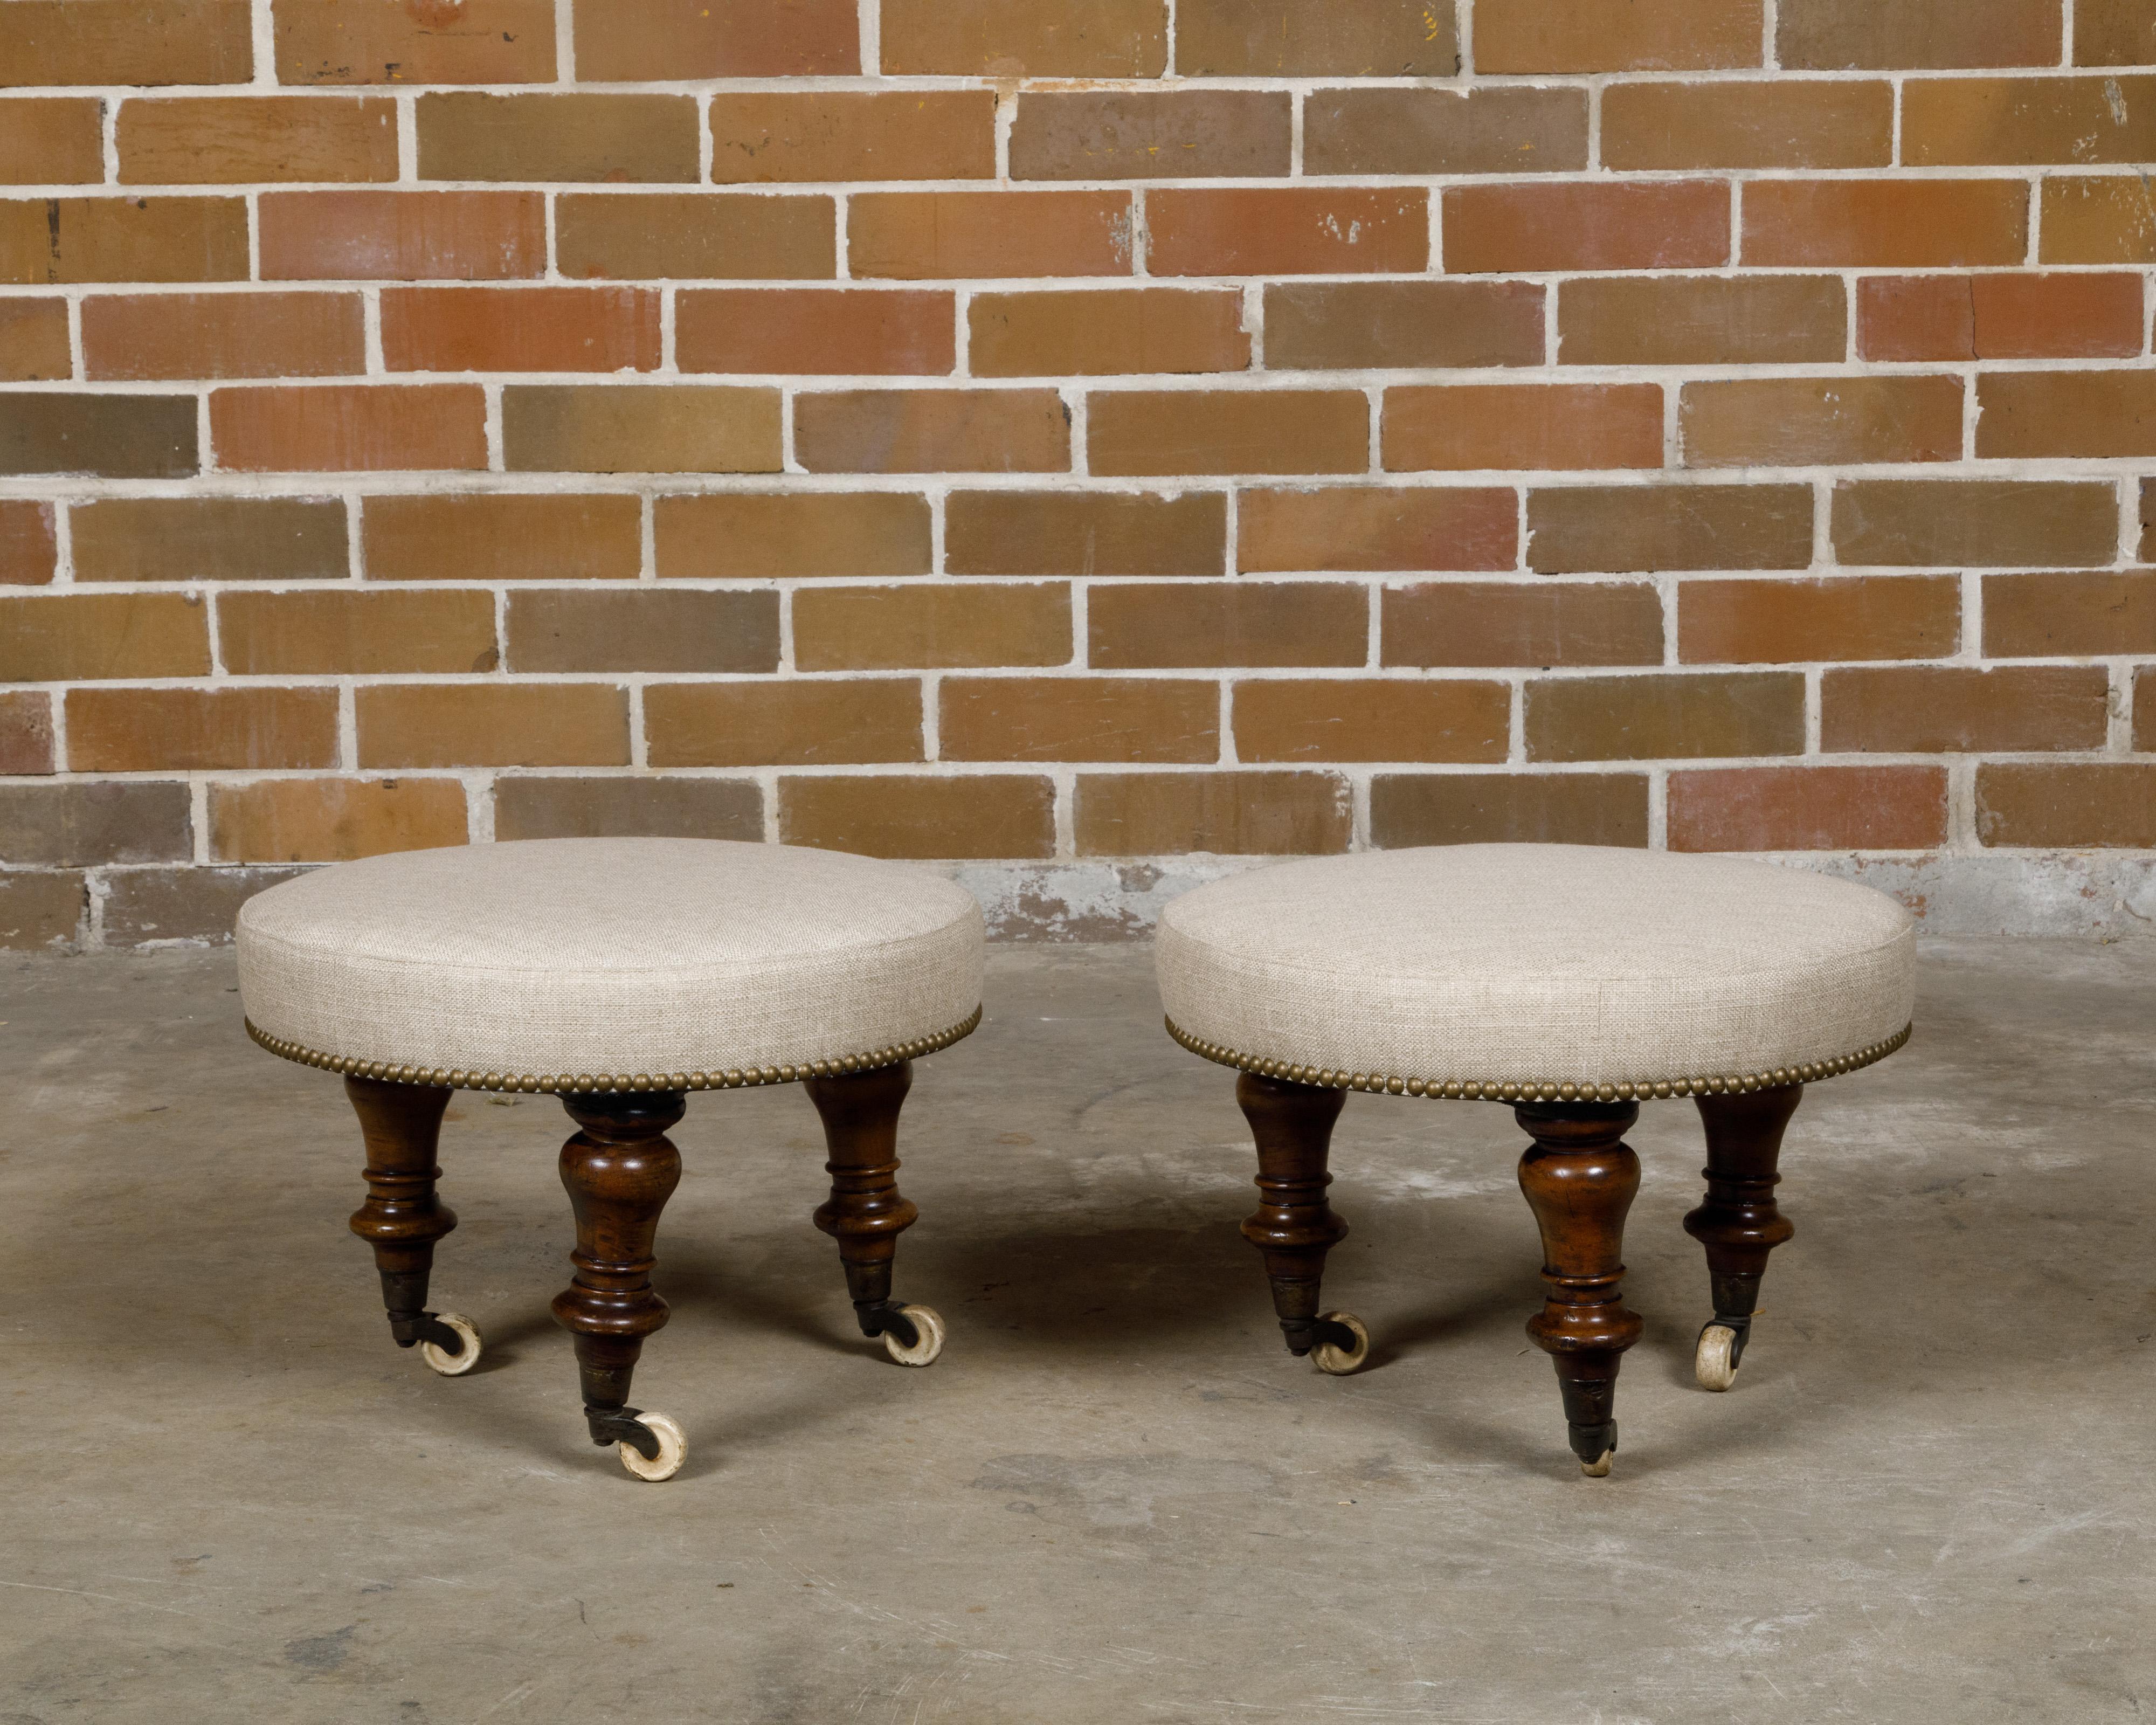 Pair of English Mahogany Stools with 19th Century Turned Legs on Casters For Sale 5